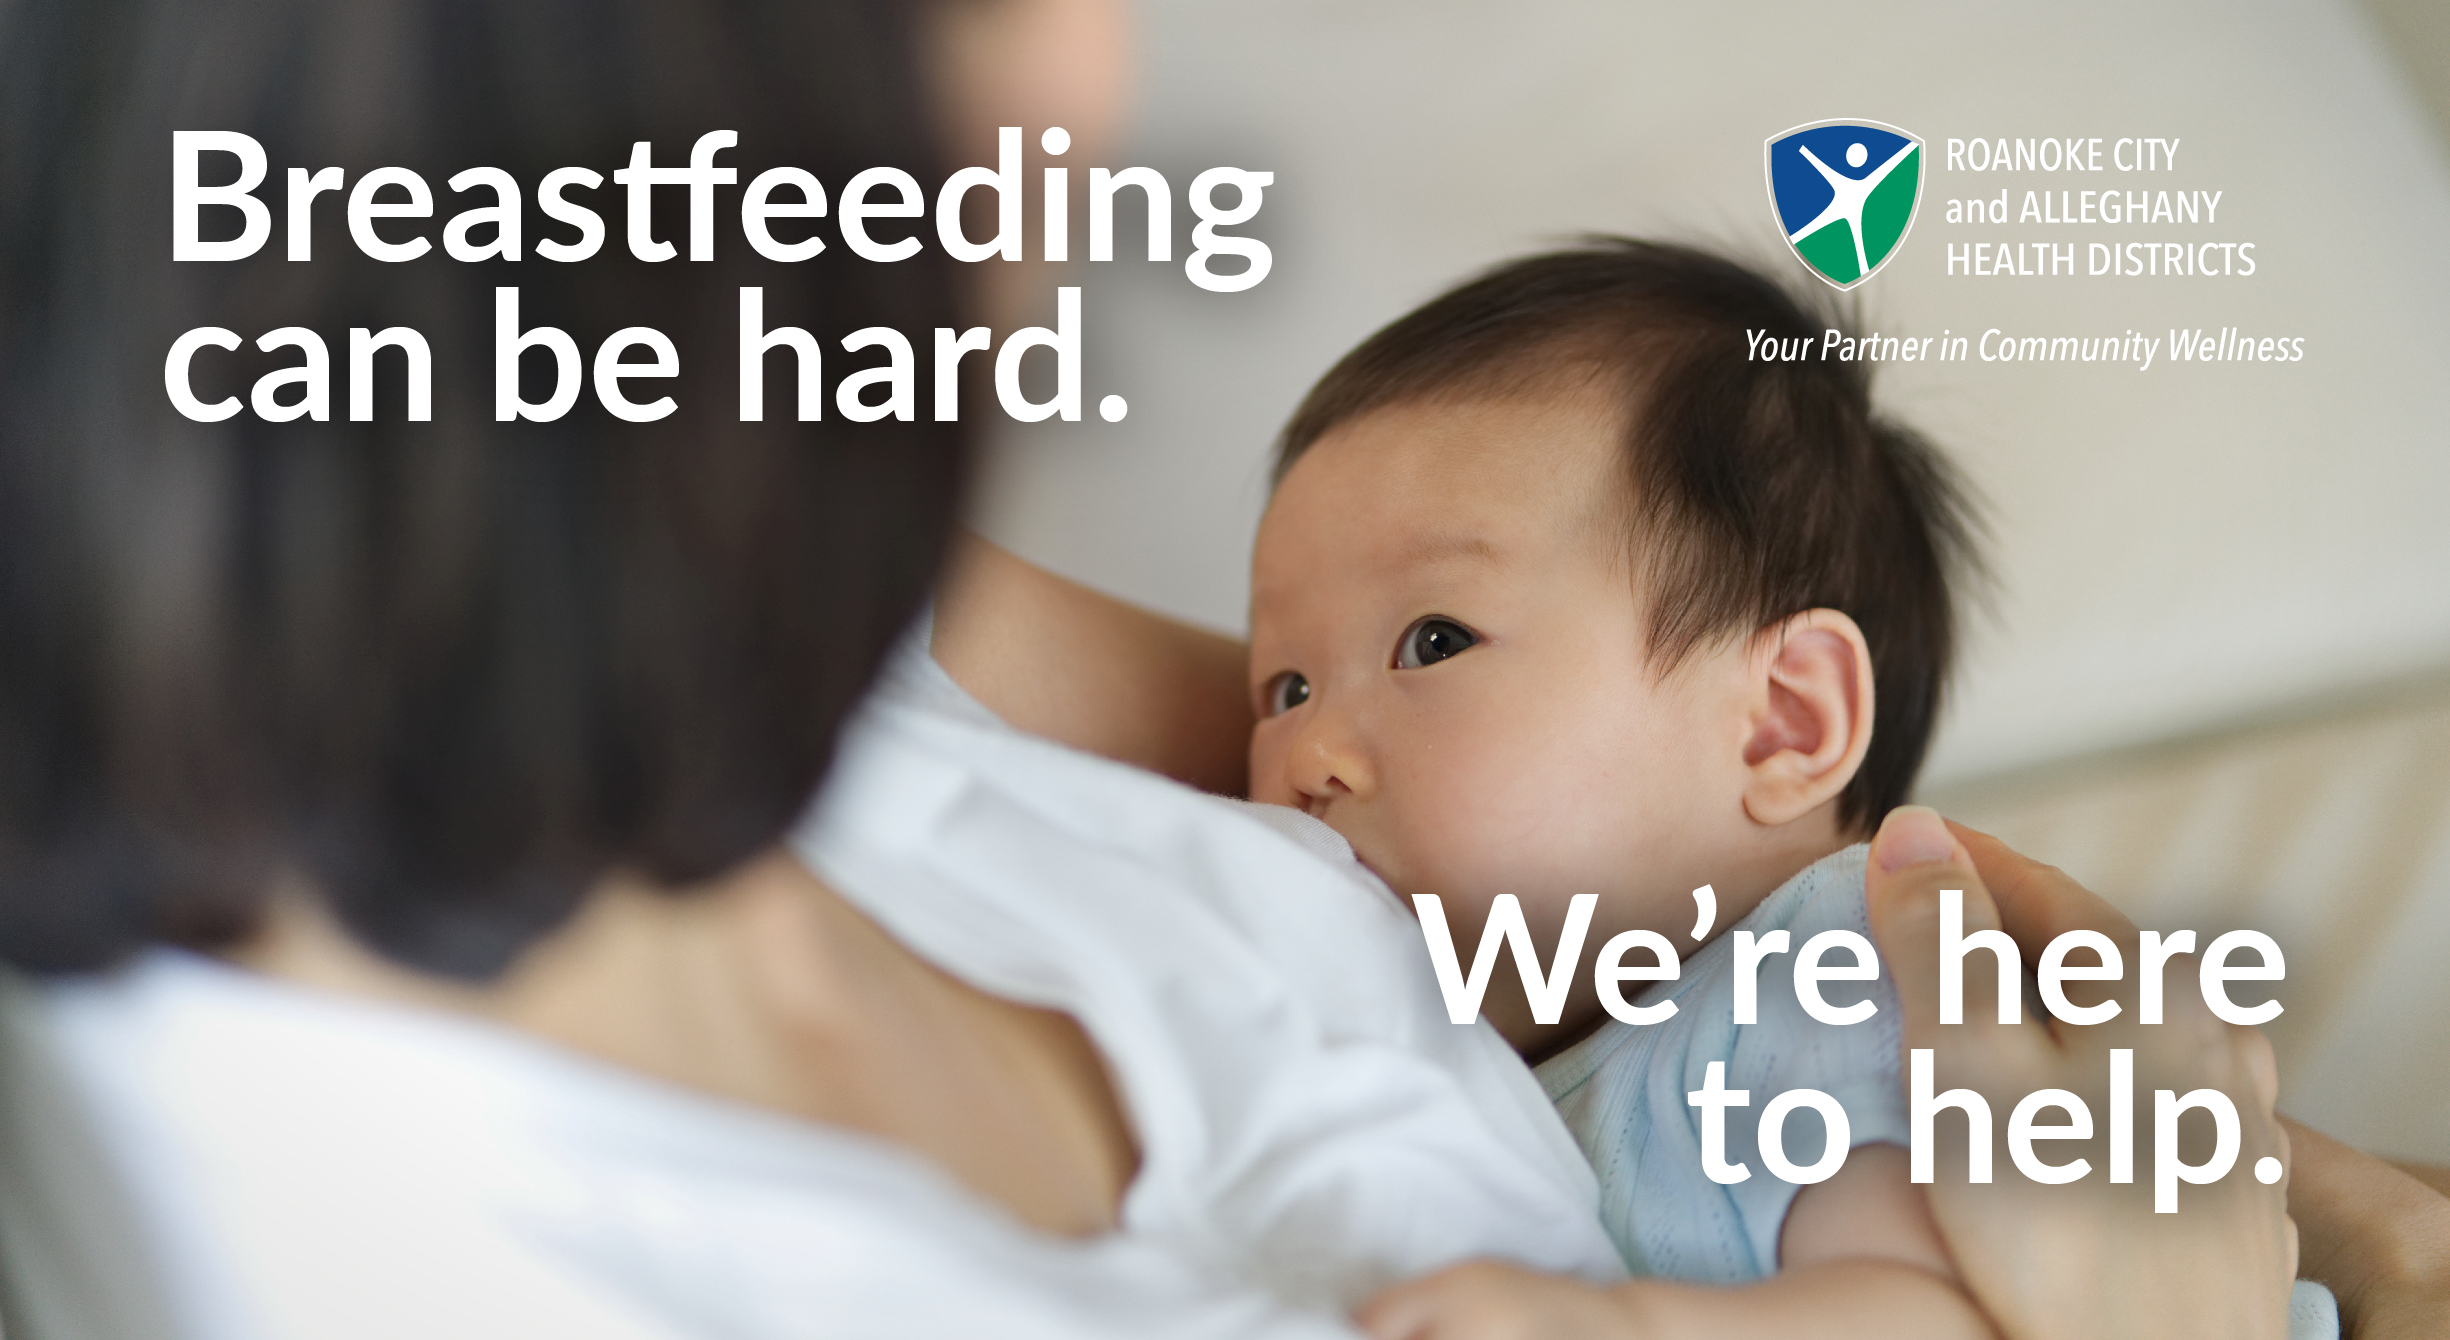 Breastfeeding can be hard. We're here to help.